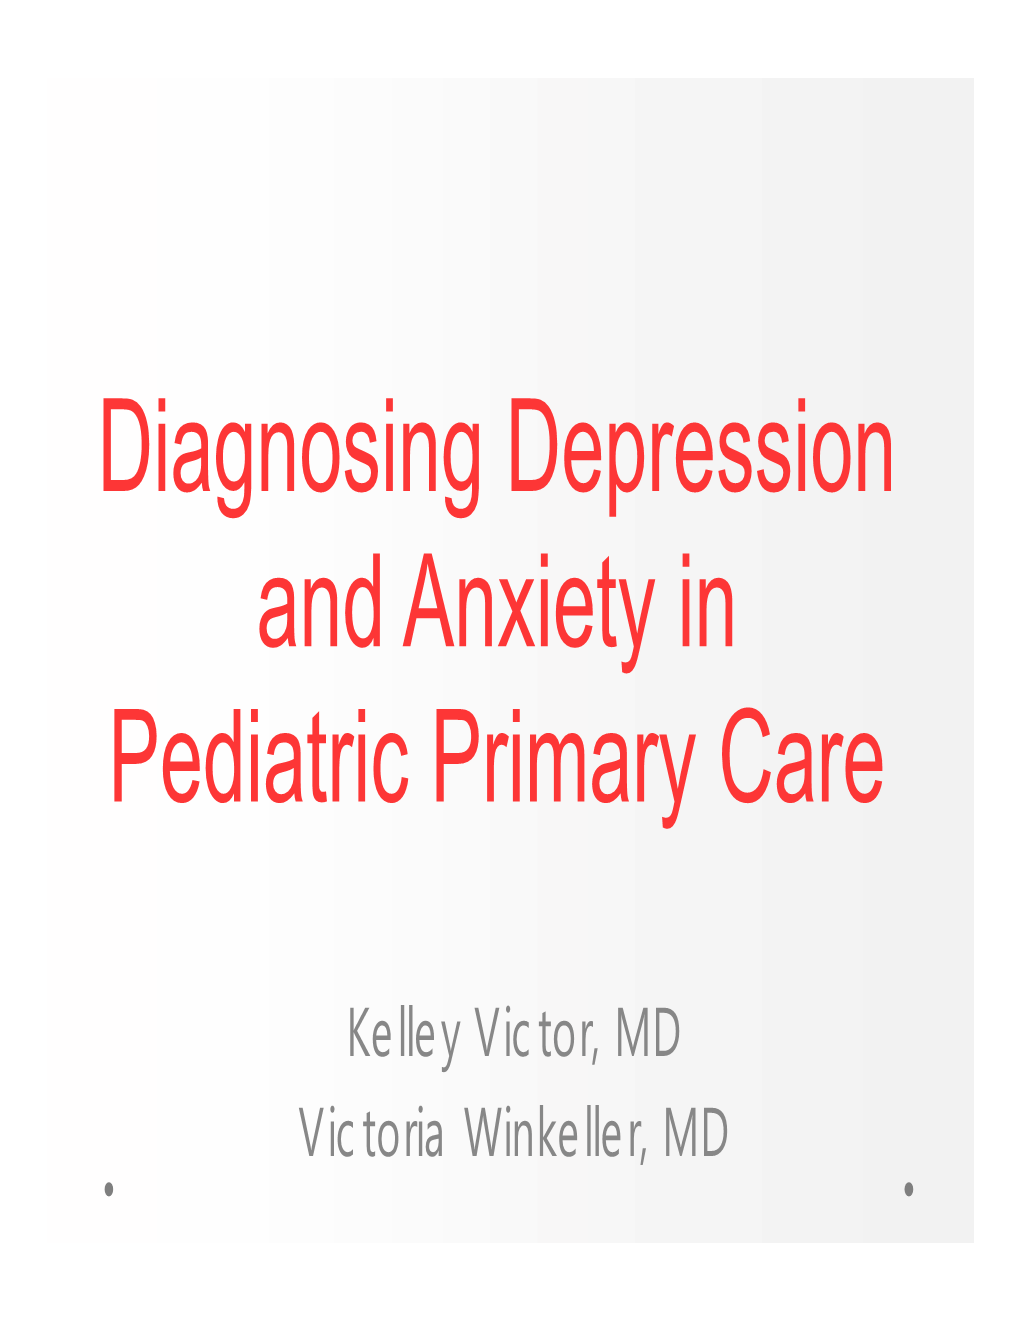 Diagnosing Depression and Anxiety in Pediatric Primary Care